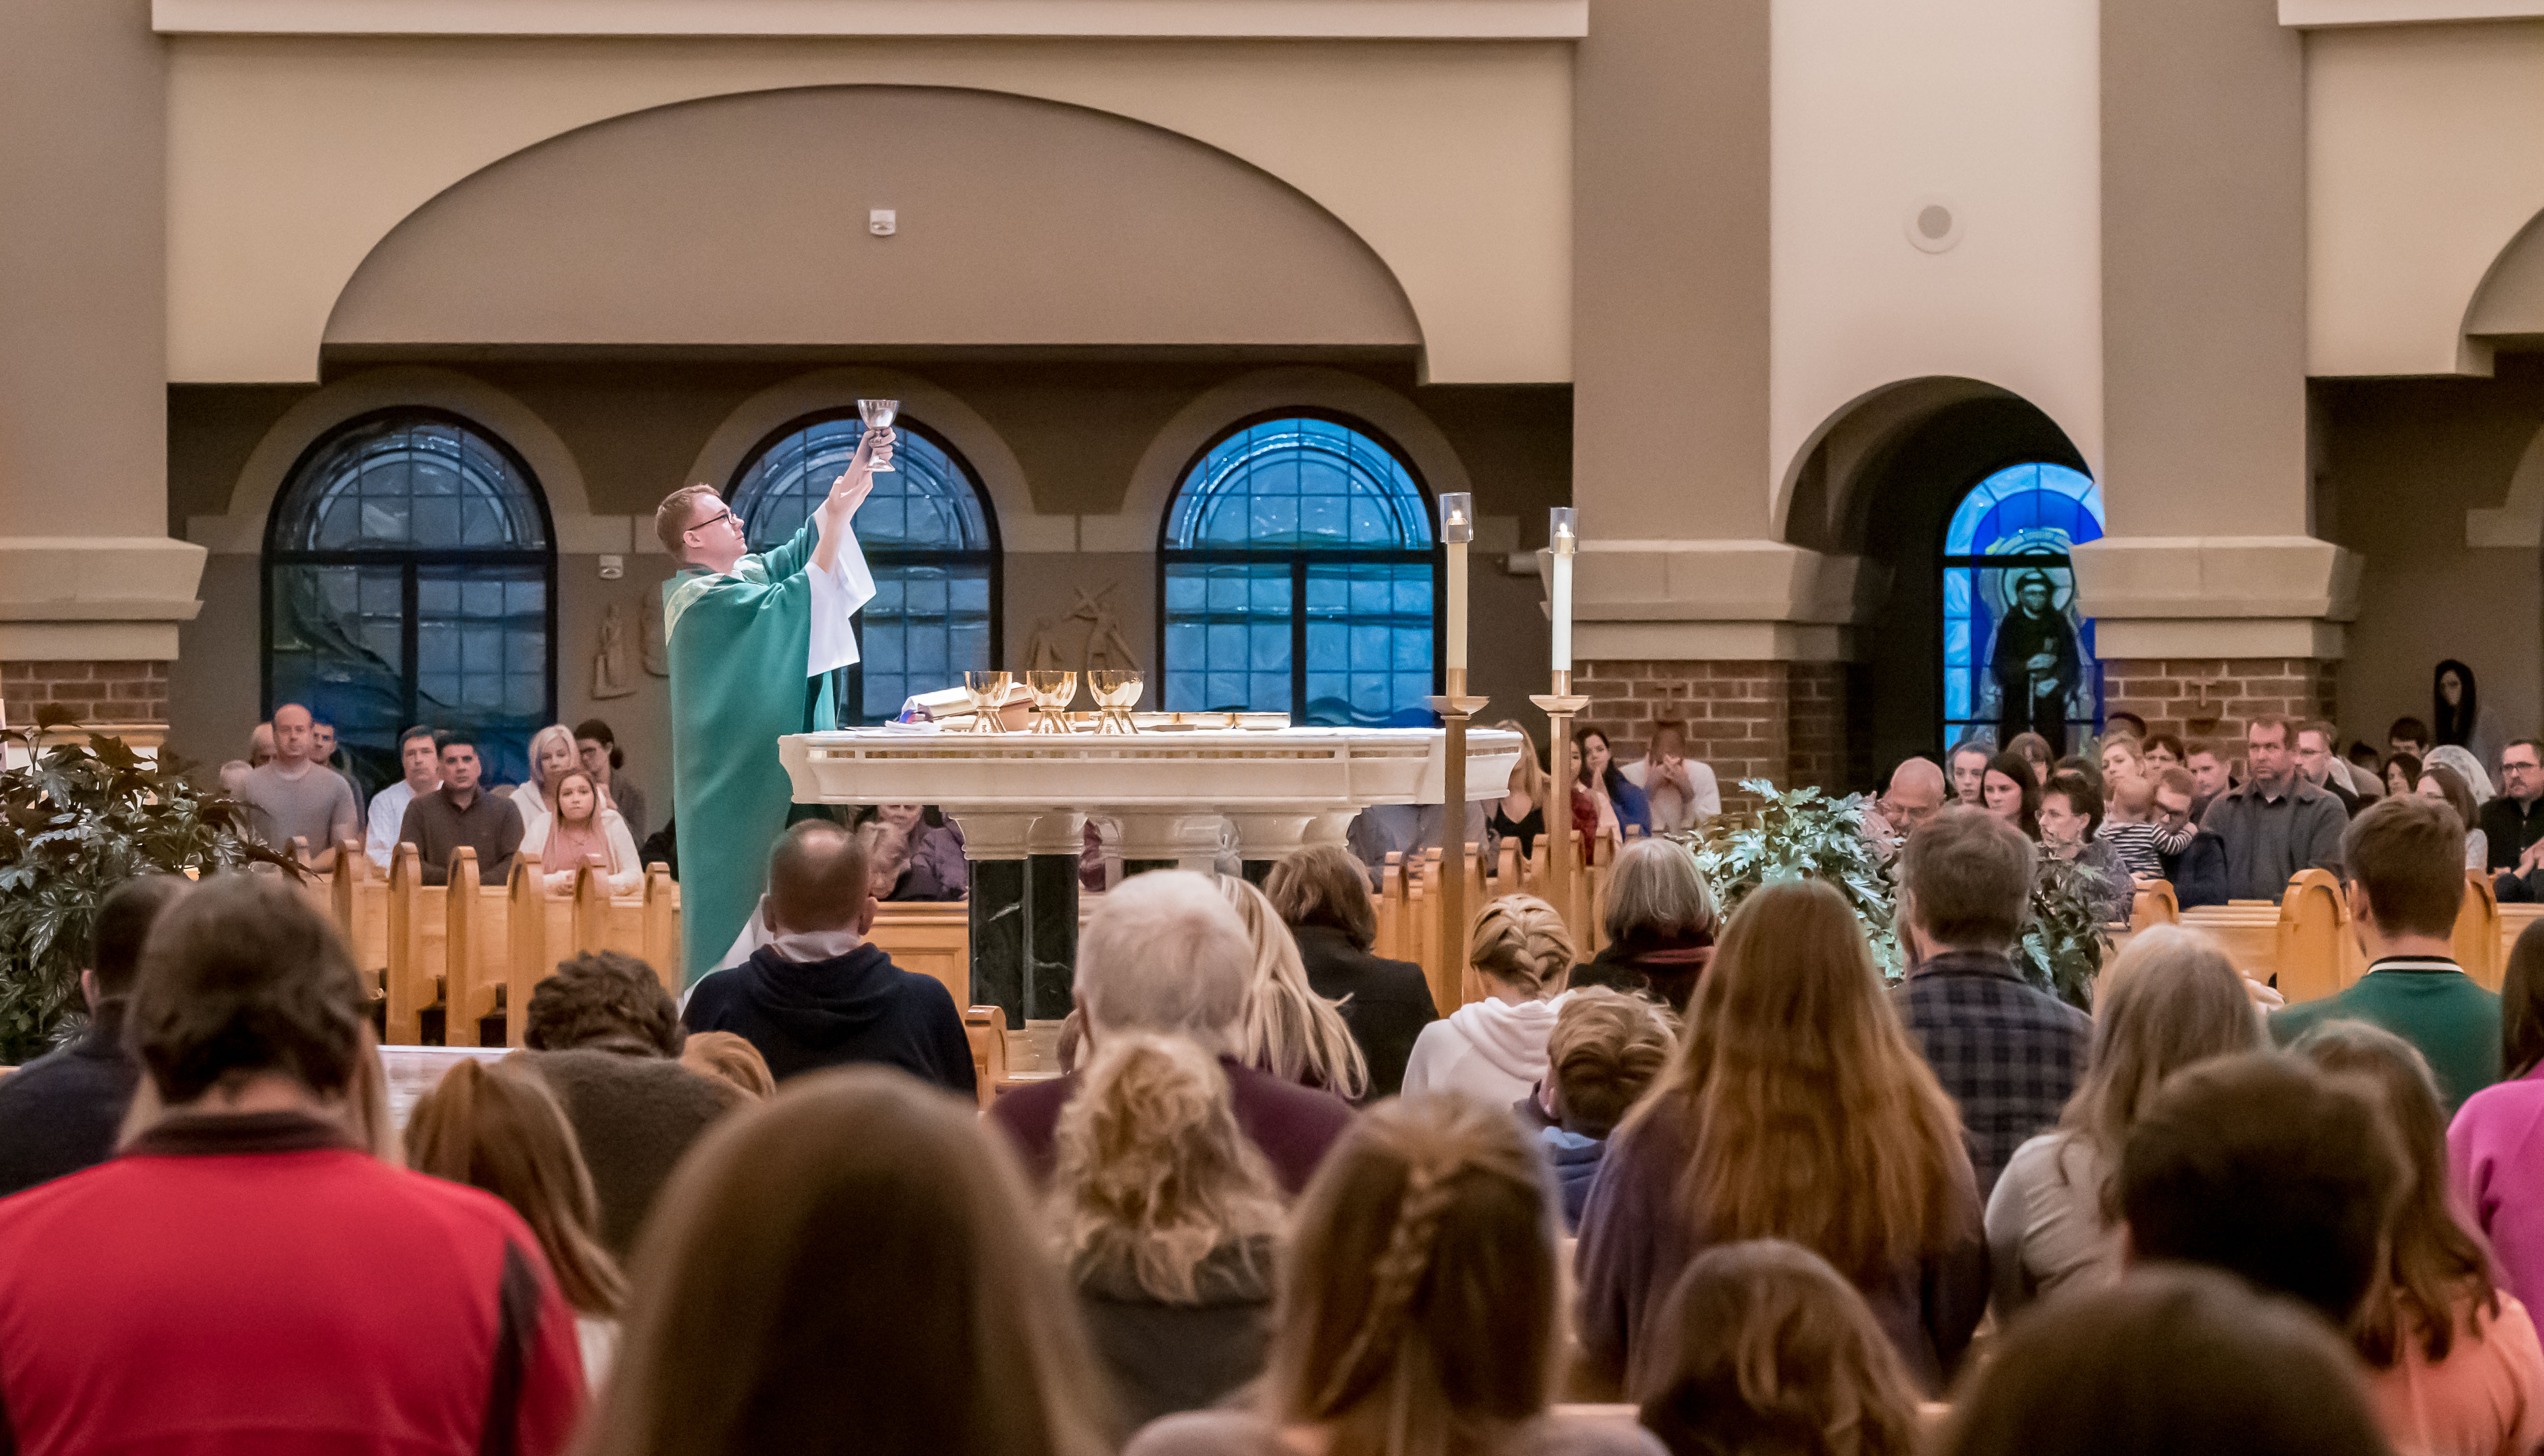 Sunday evening Masses a popular option in diocese Today's Catholic